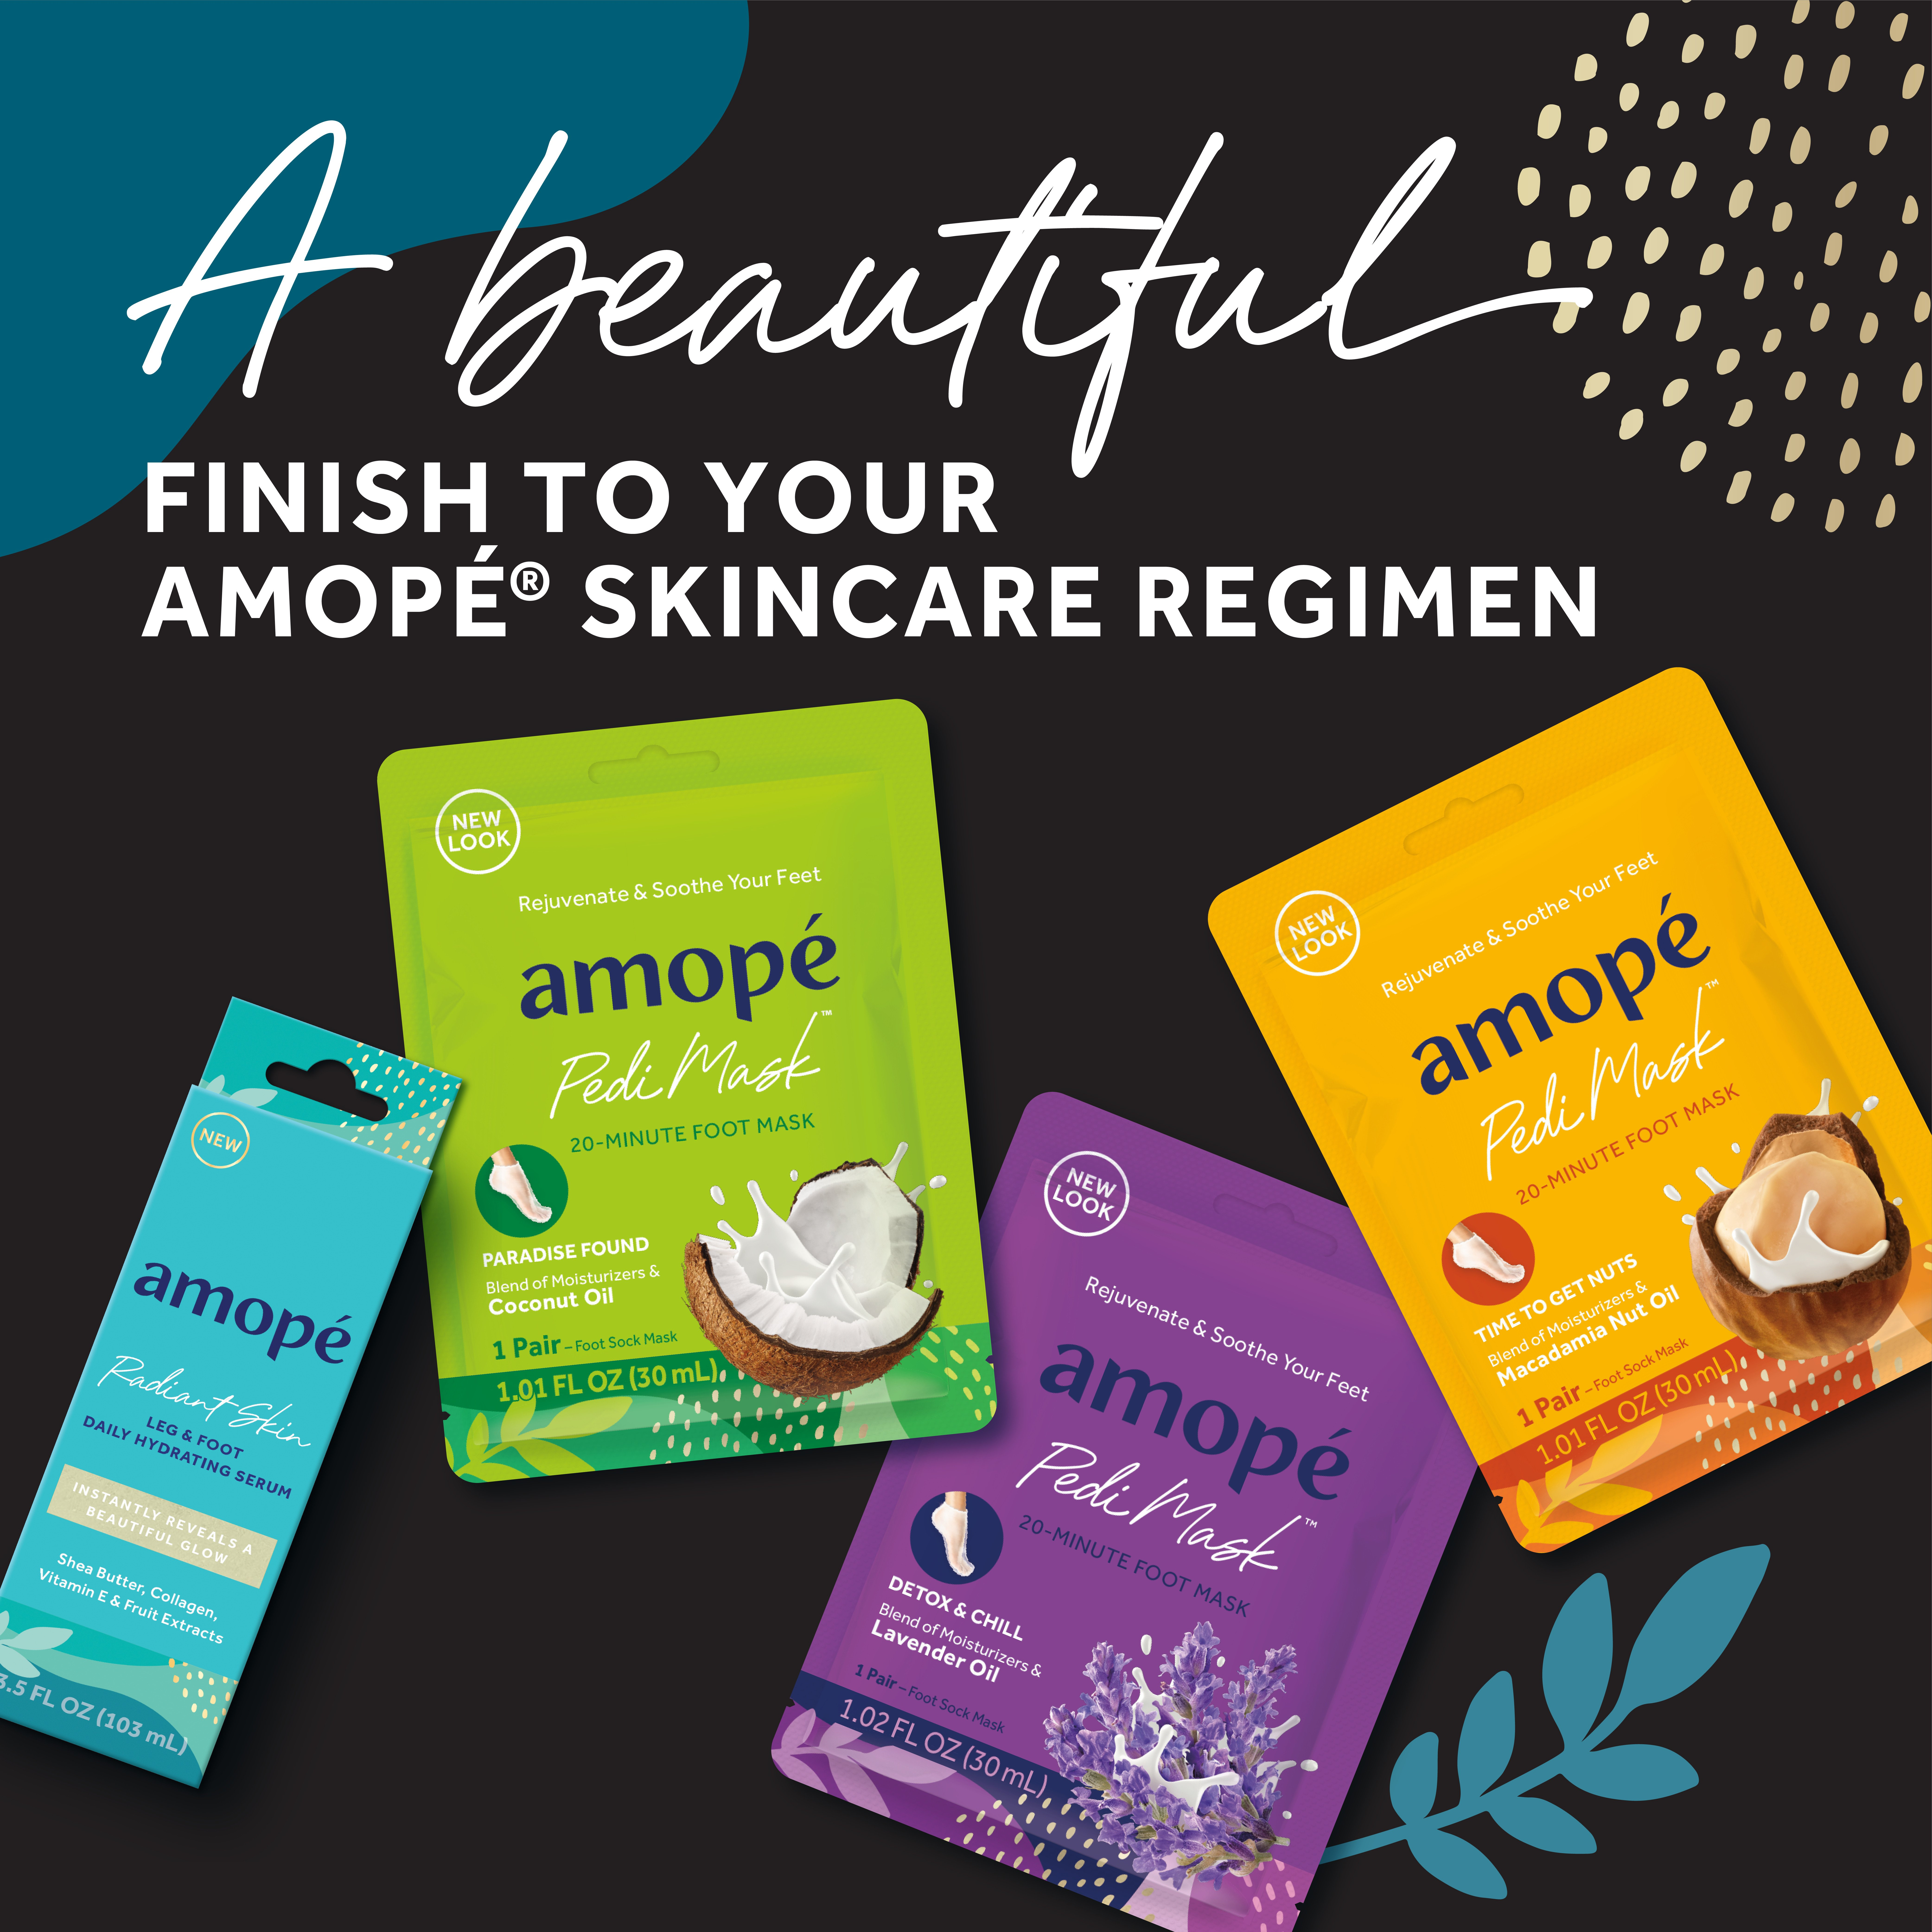 image of a beautiful finish to your amope skincare regimen